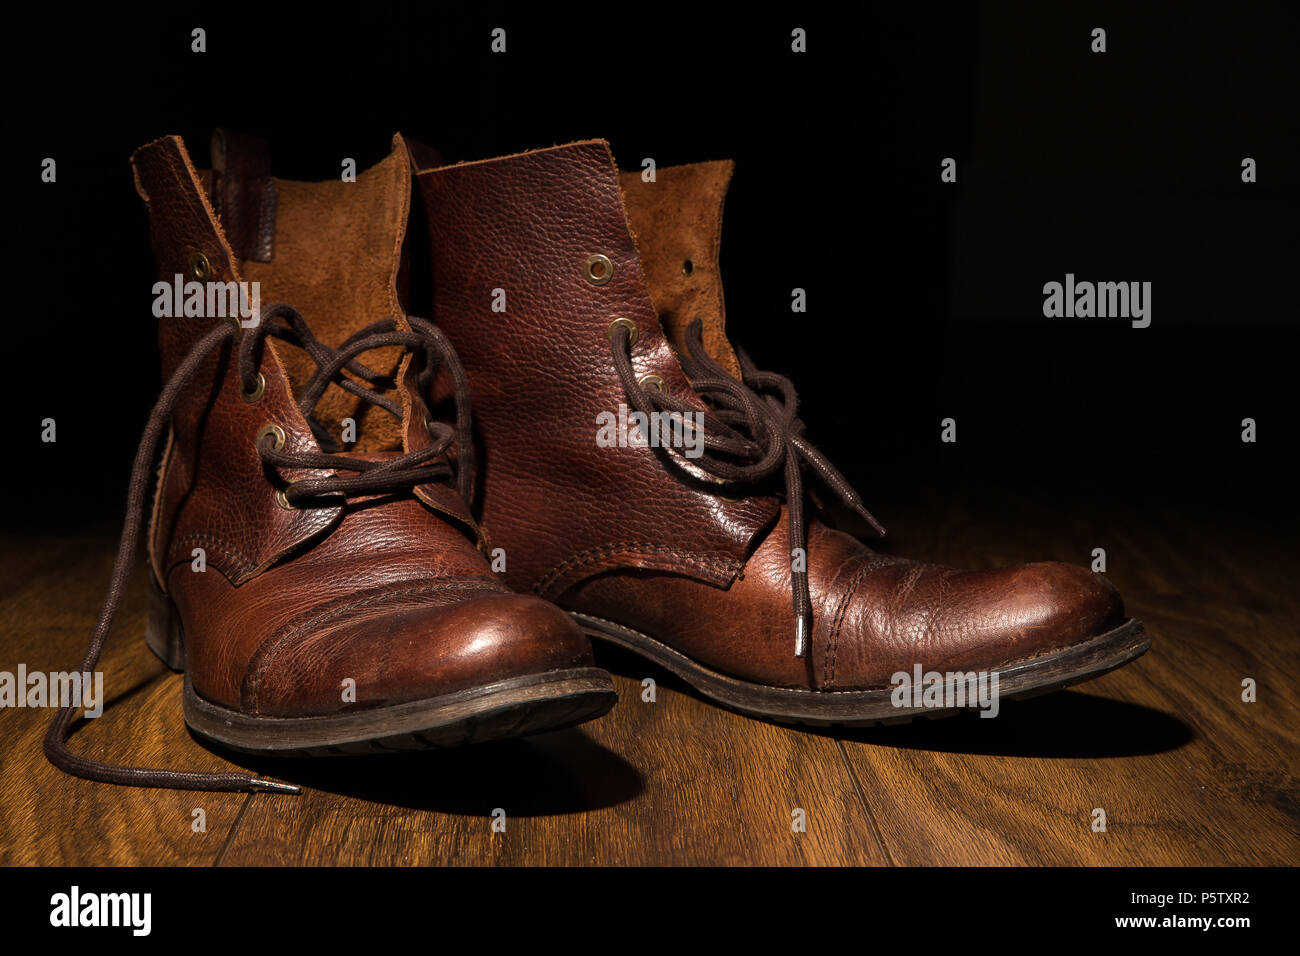 Close up of men's traditional brown, leather ankle boots, laces undone, on wooden flooring with dark background. Artistic low-key lighting. Stock Photo